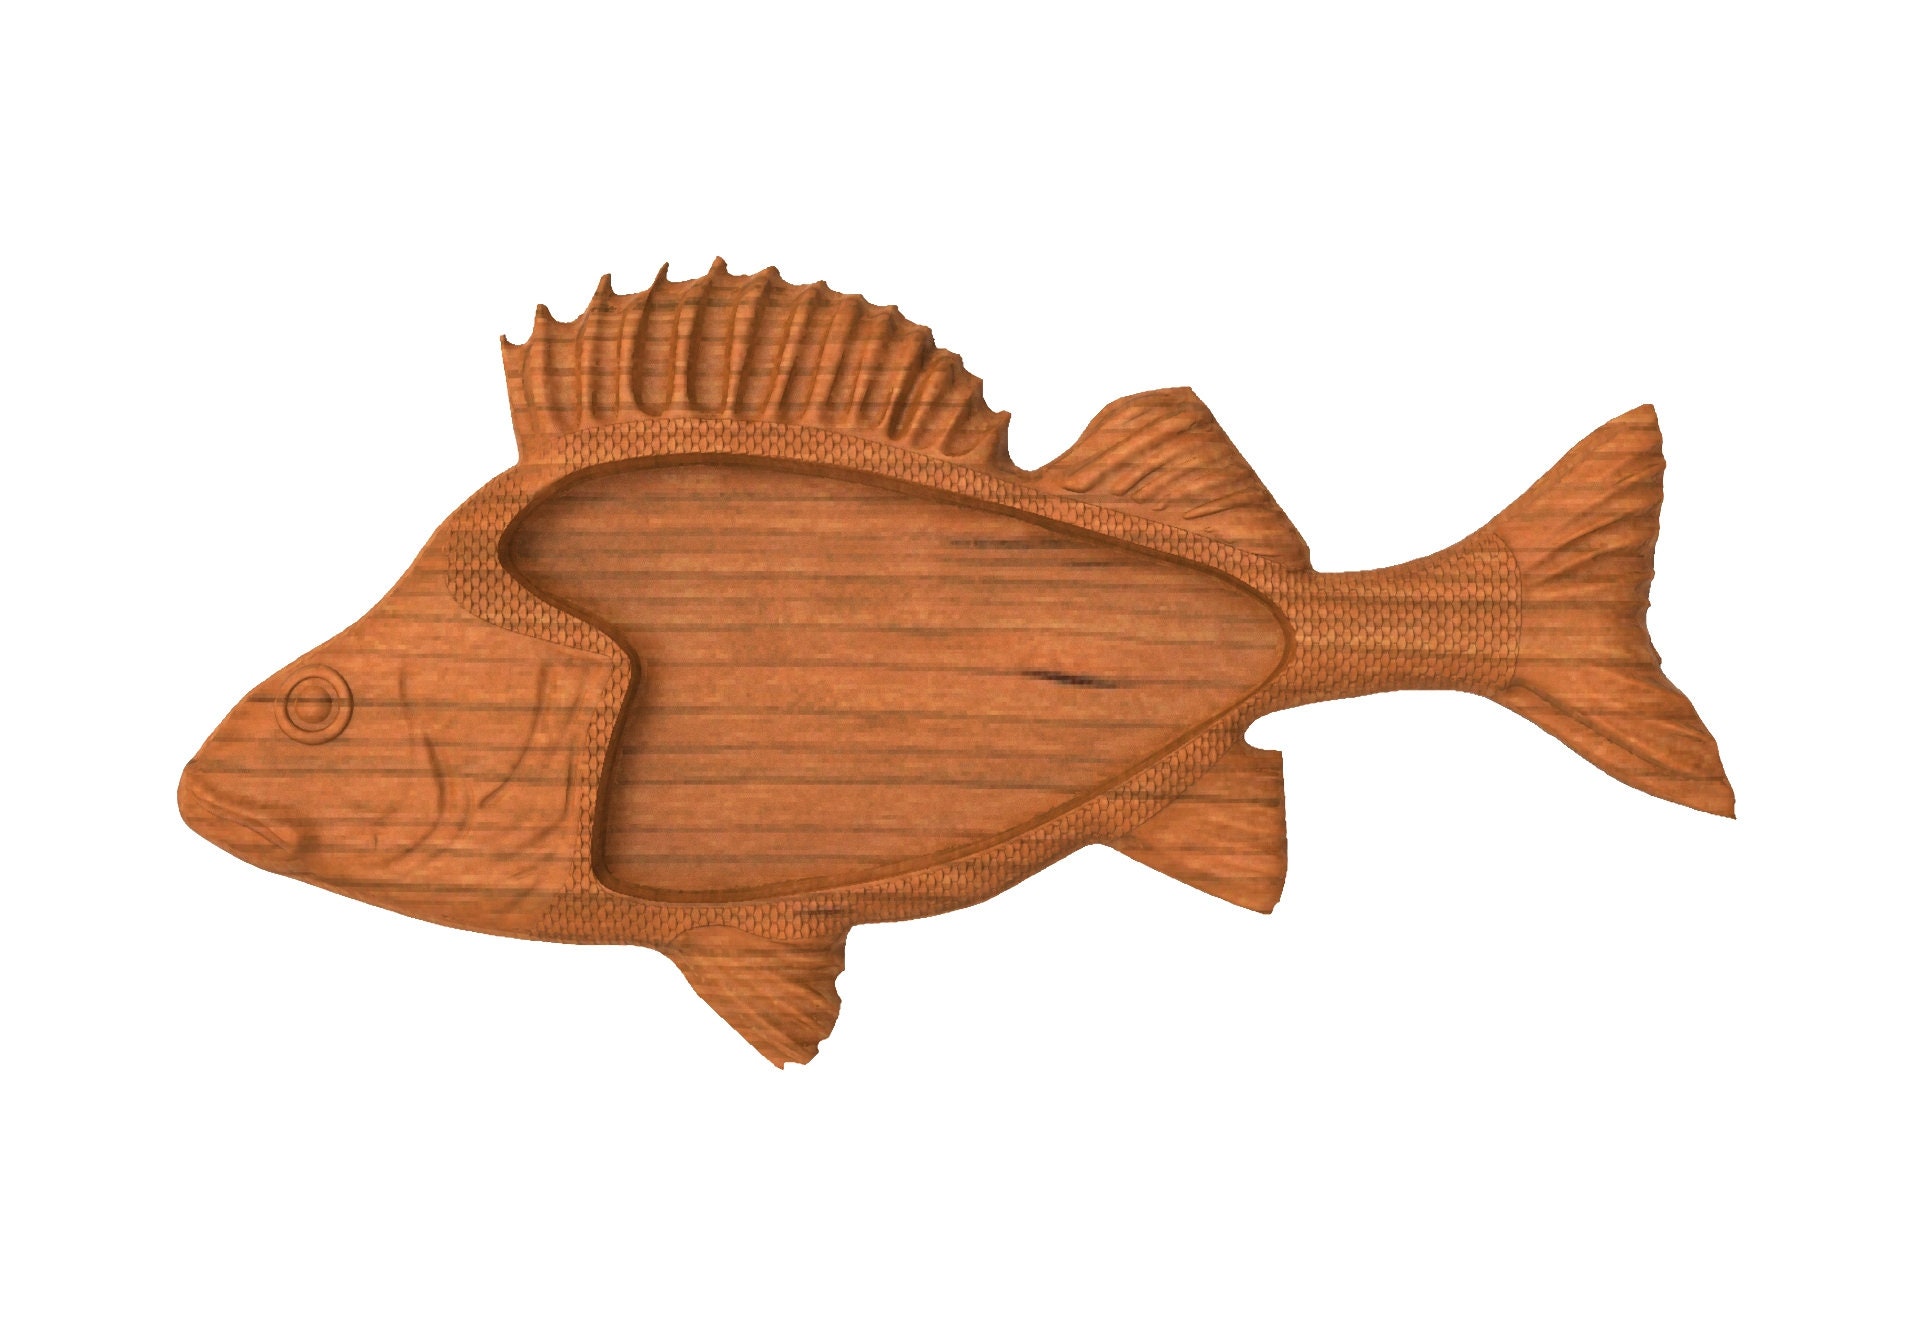 Buy Wood Fish Tray Online In India -  India